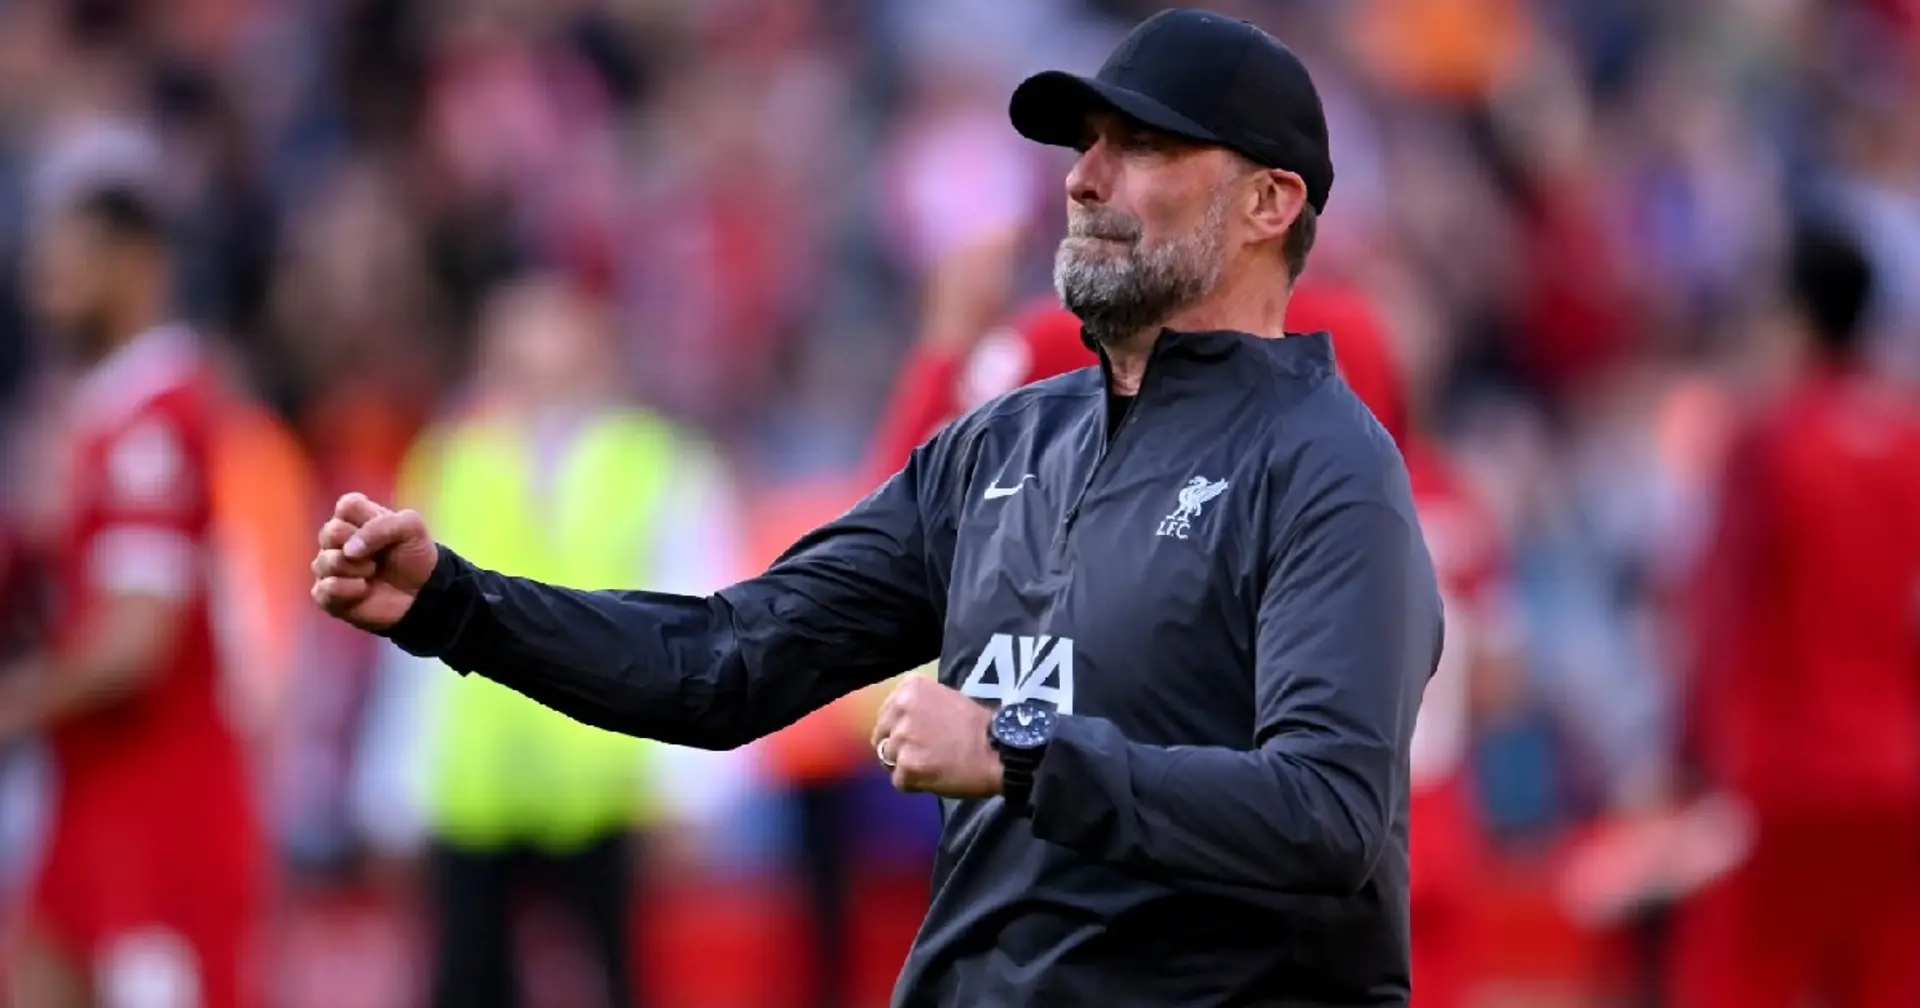 'If the next manager doesn't like it, I couldn't be bothered': Klopp promises to do one thing after he leaves Liverpool